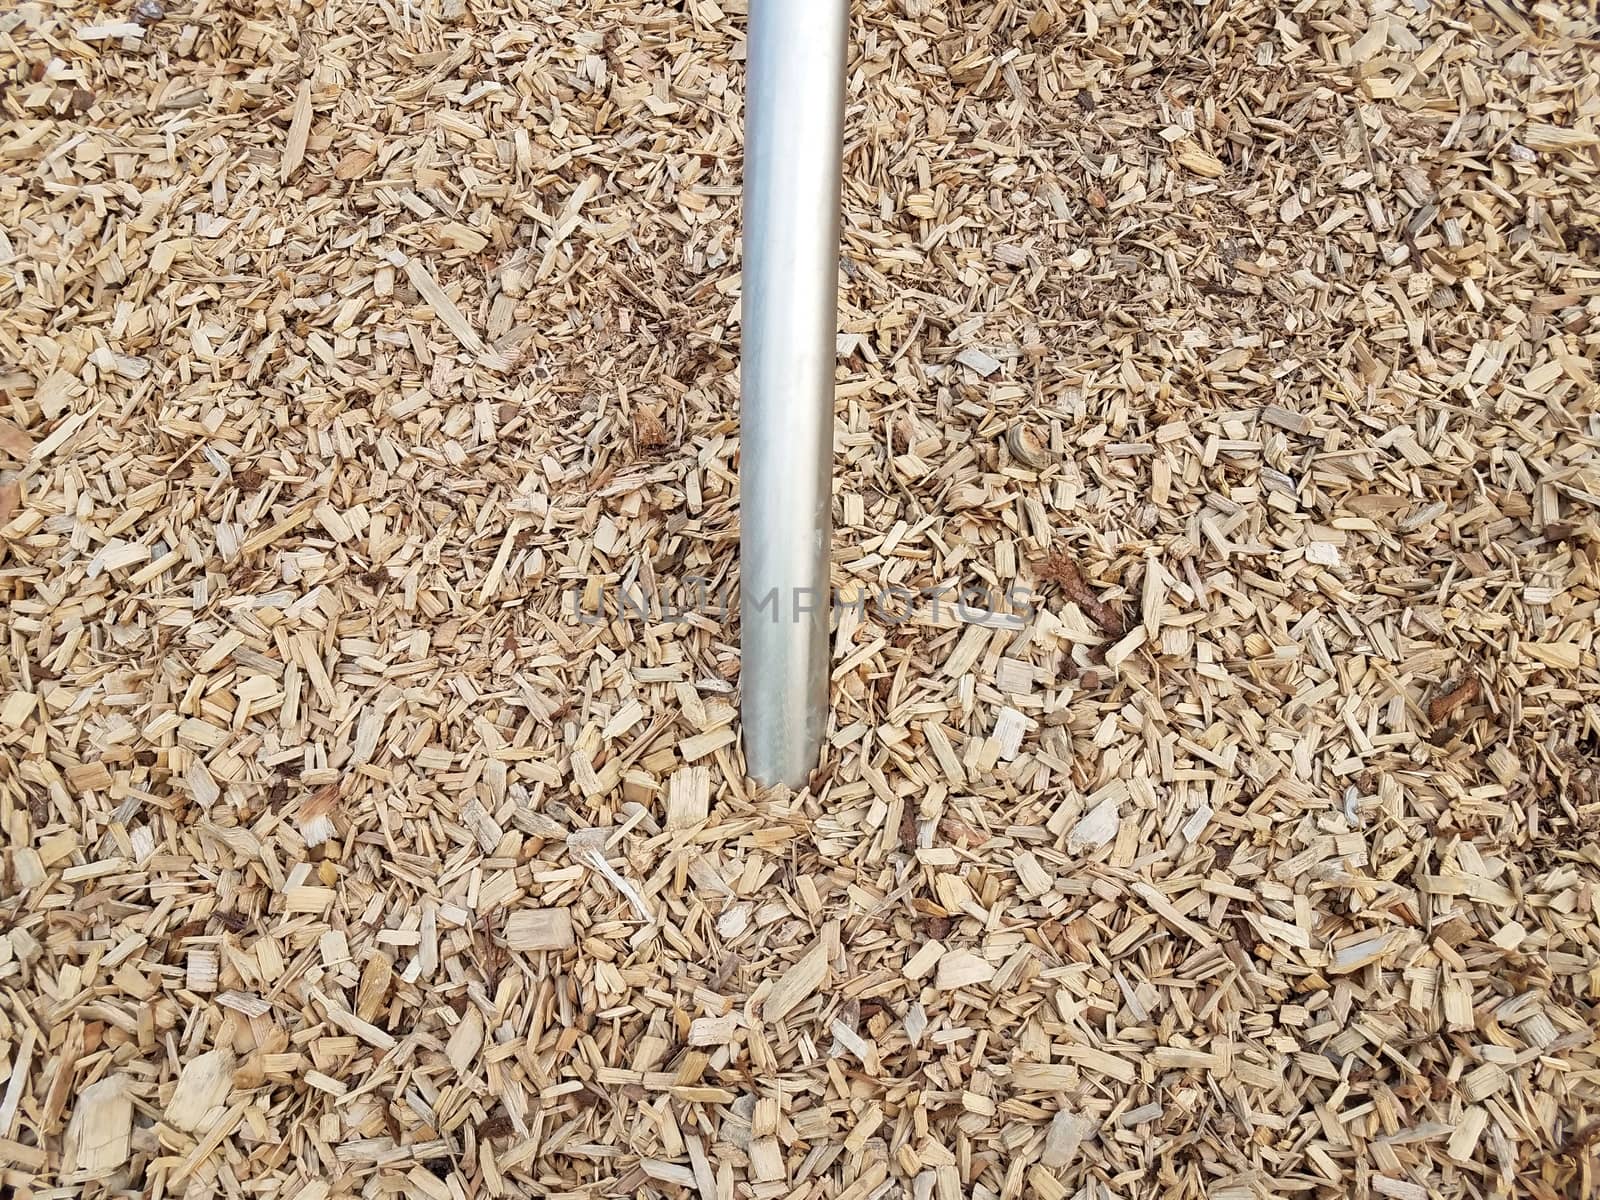 silver metallic bar or rod in brown mulch or wood chips